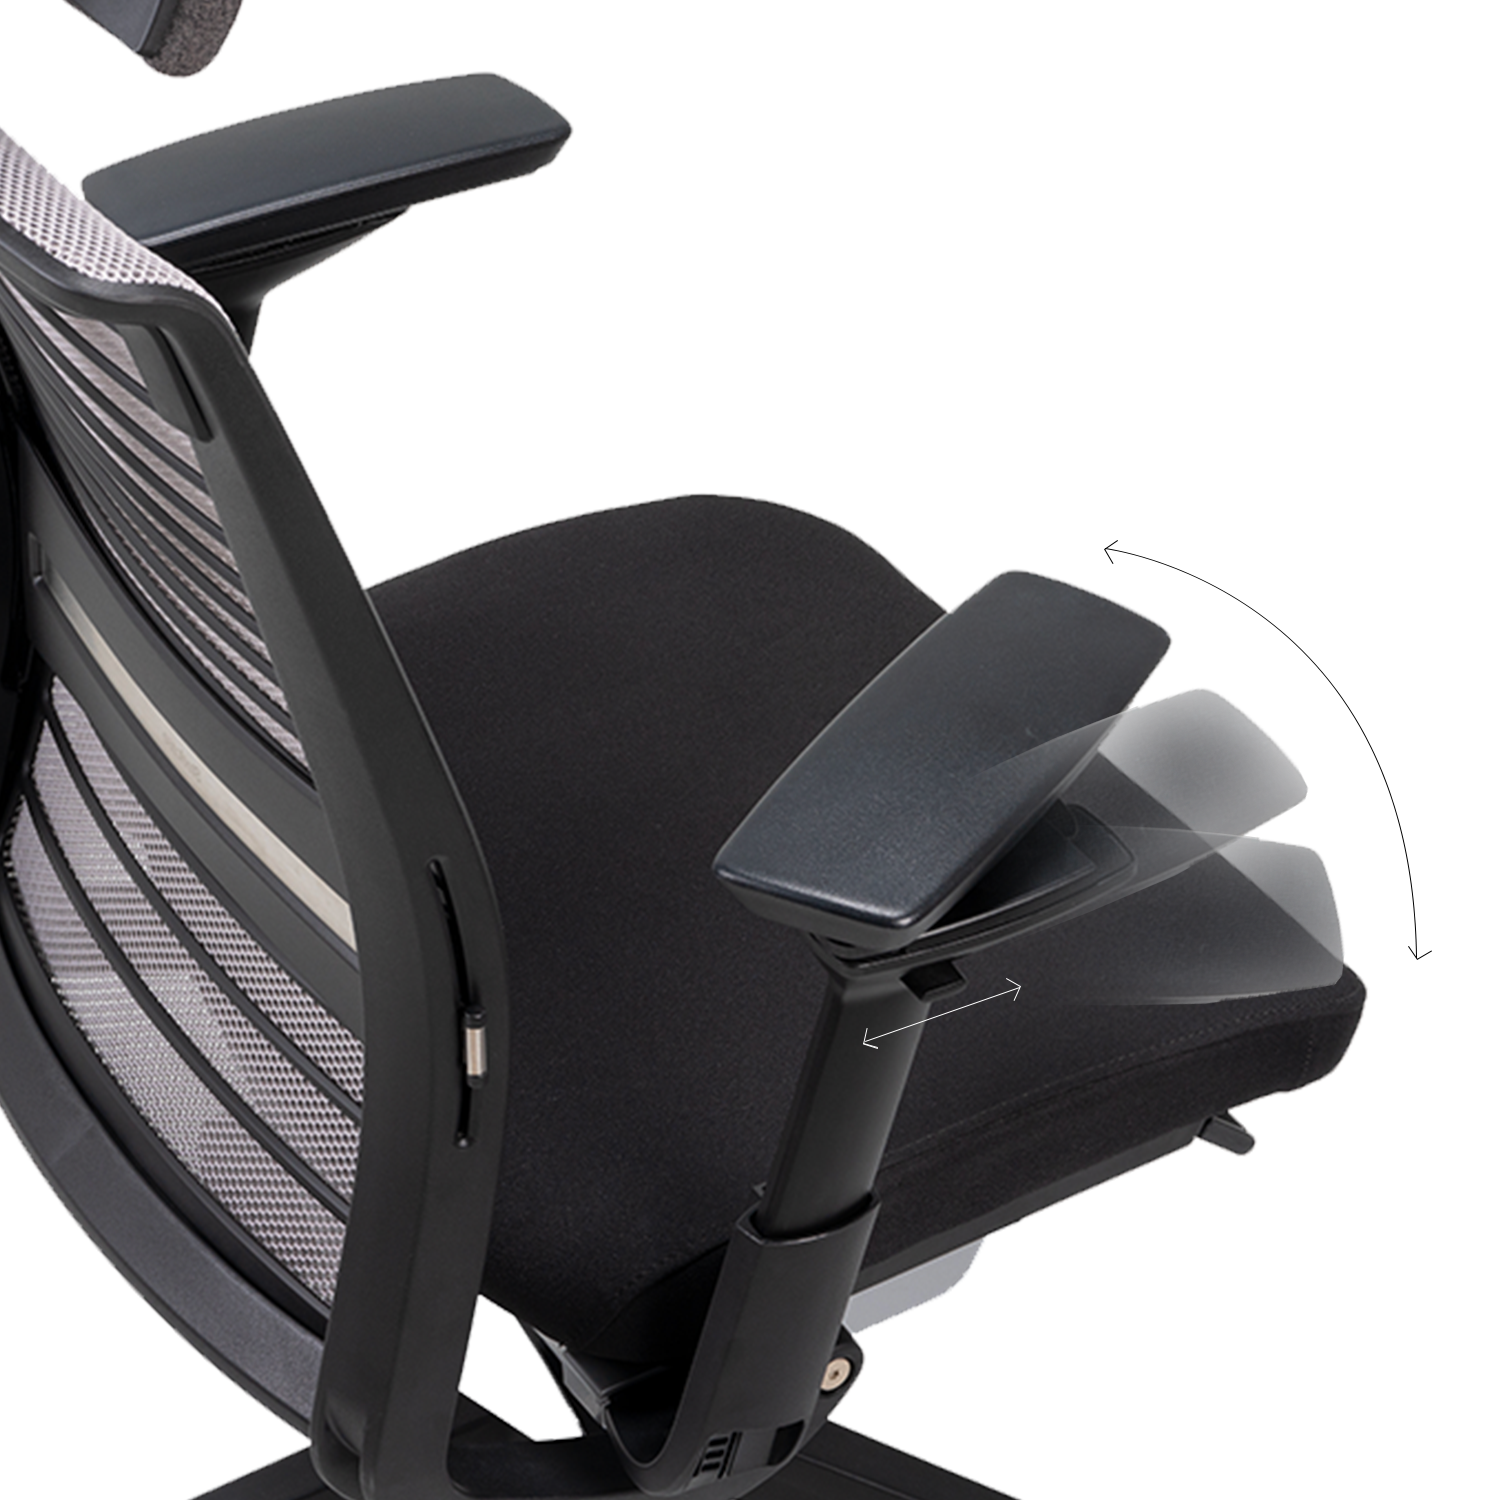 Steelcase Leap Chairs with 3D Knit Mesh Back